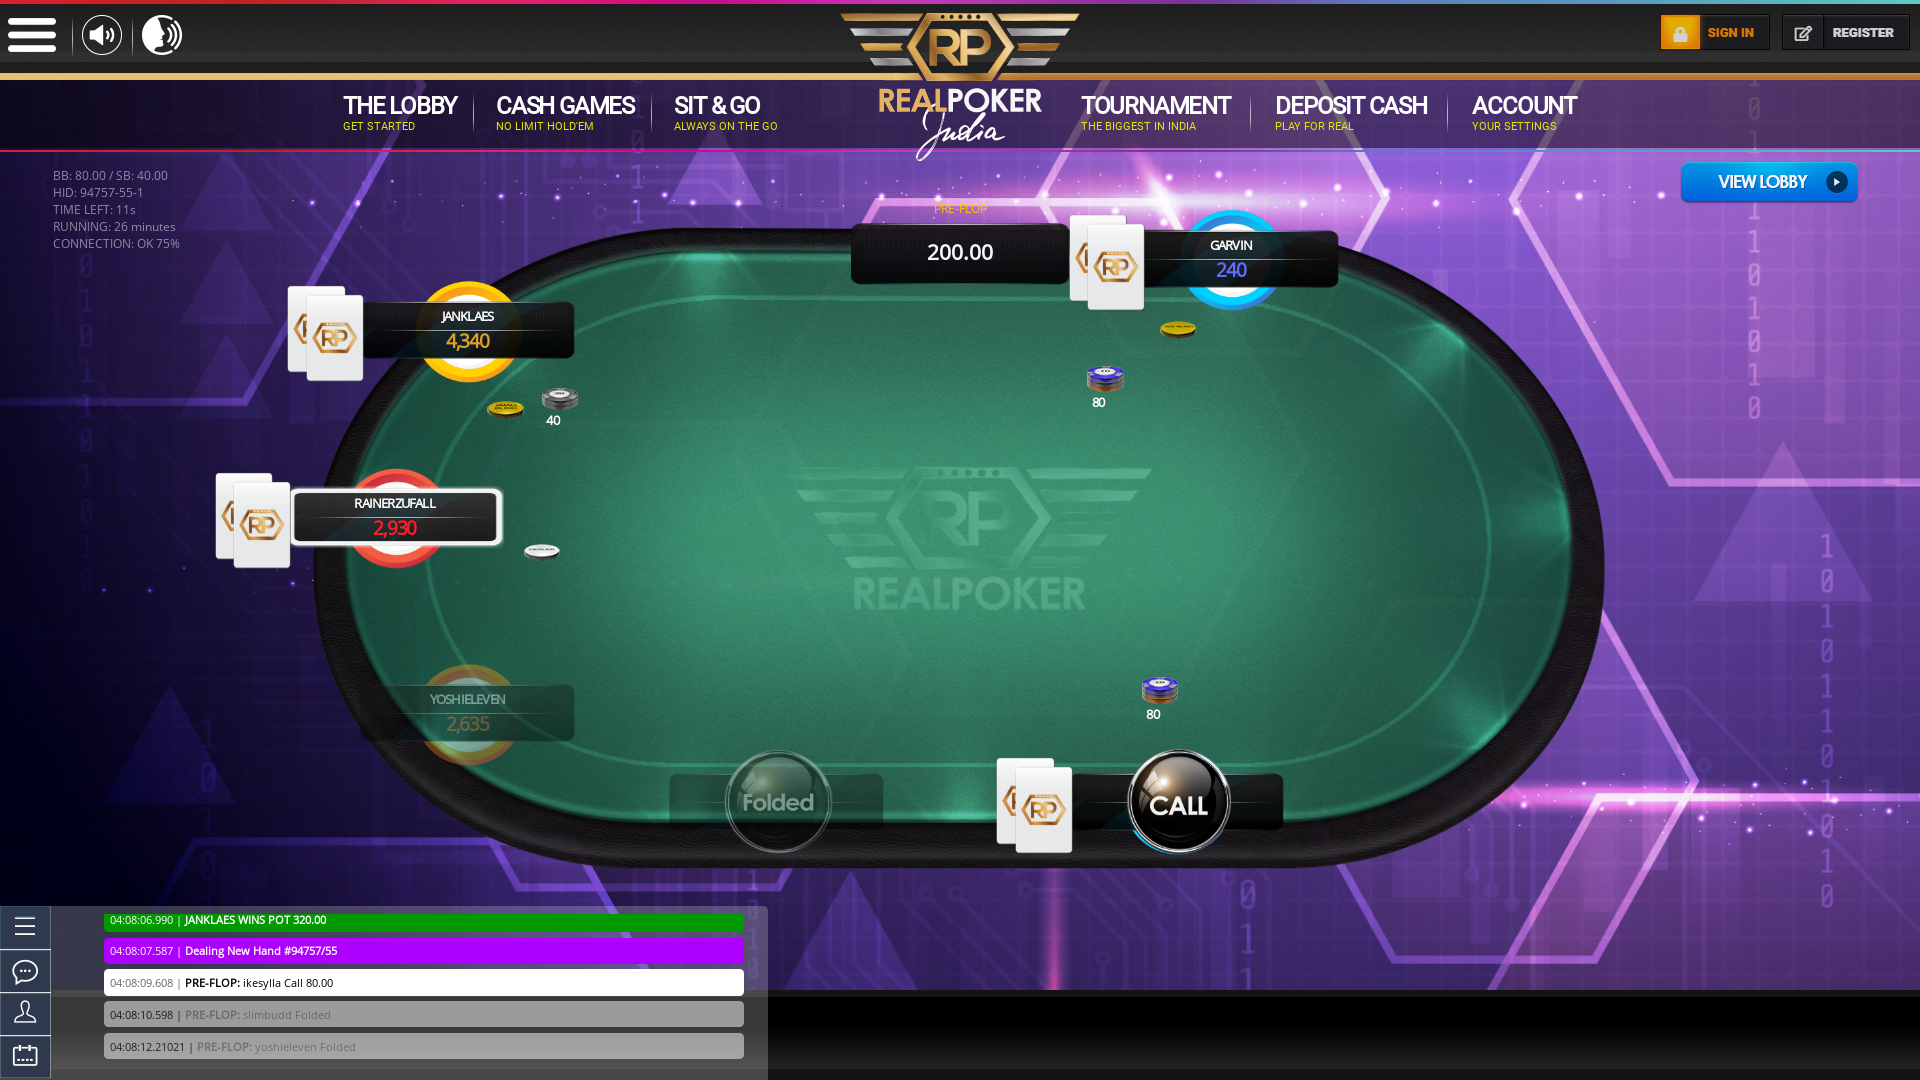 Online poker on a 10 player table in the 26th minute match up